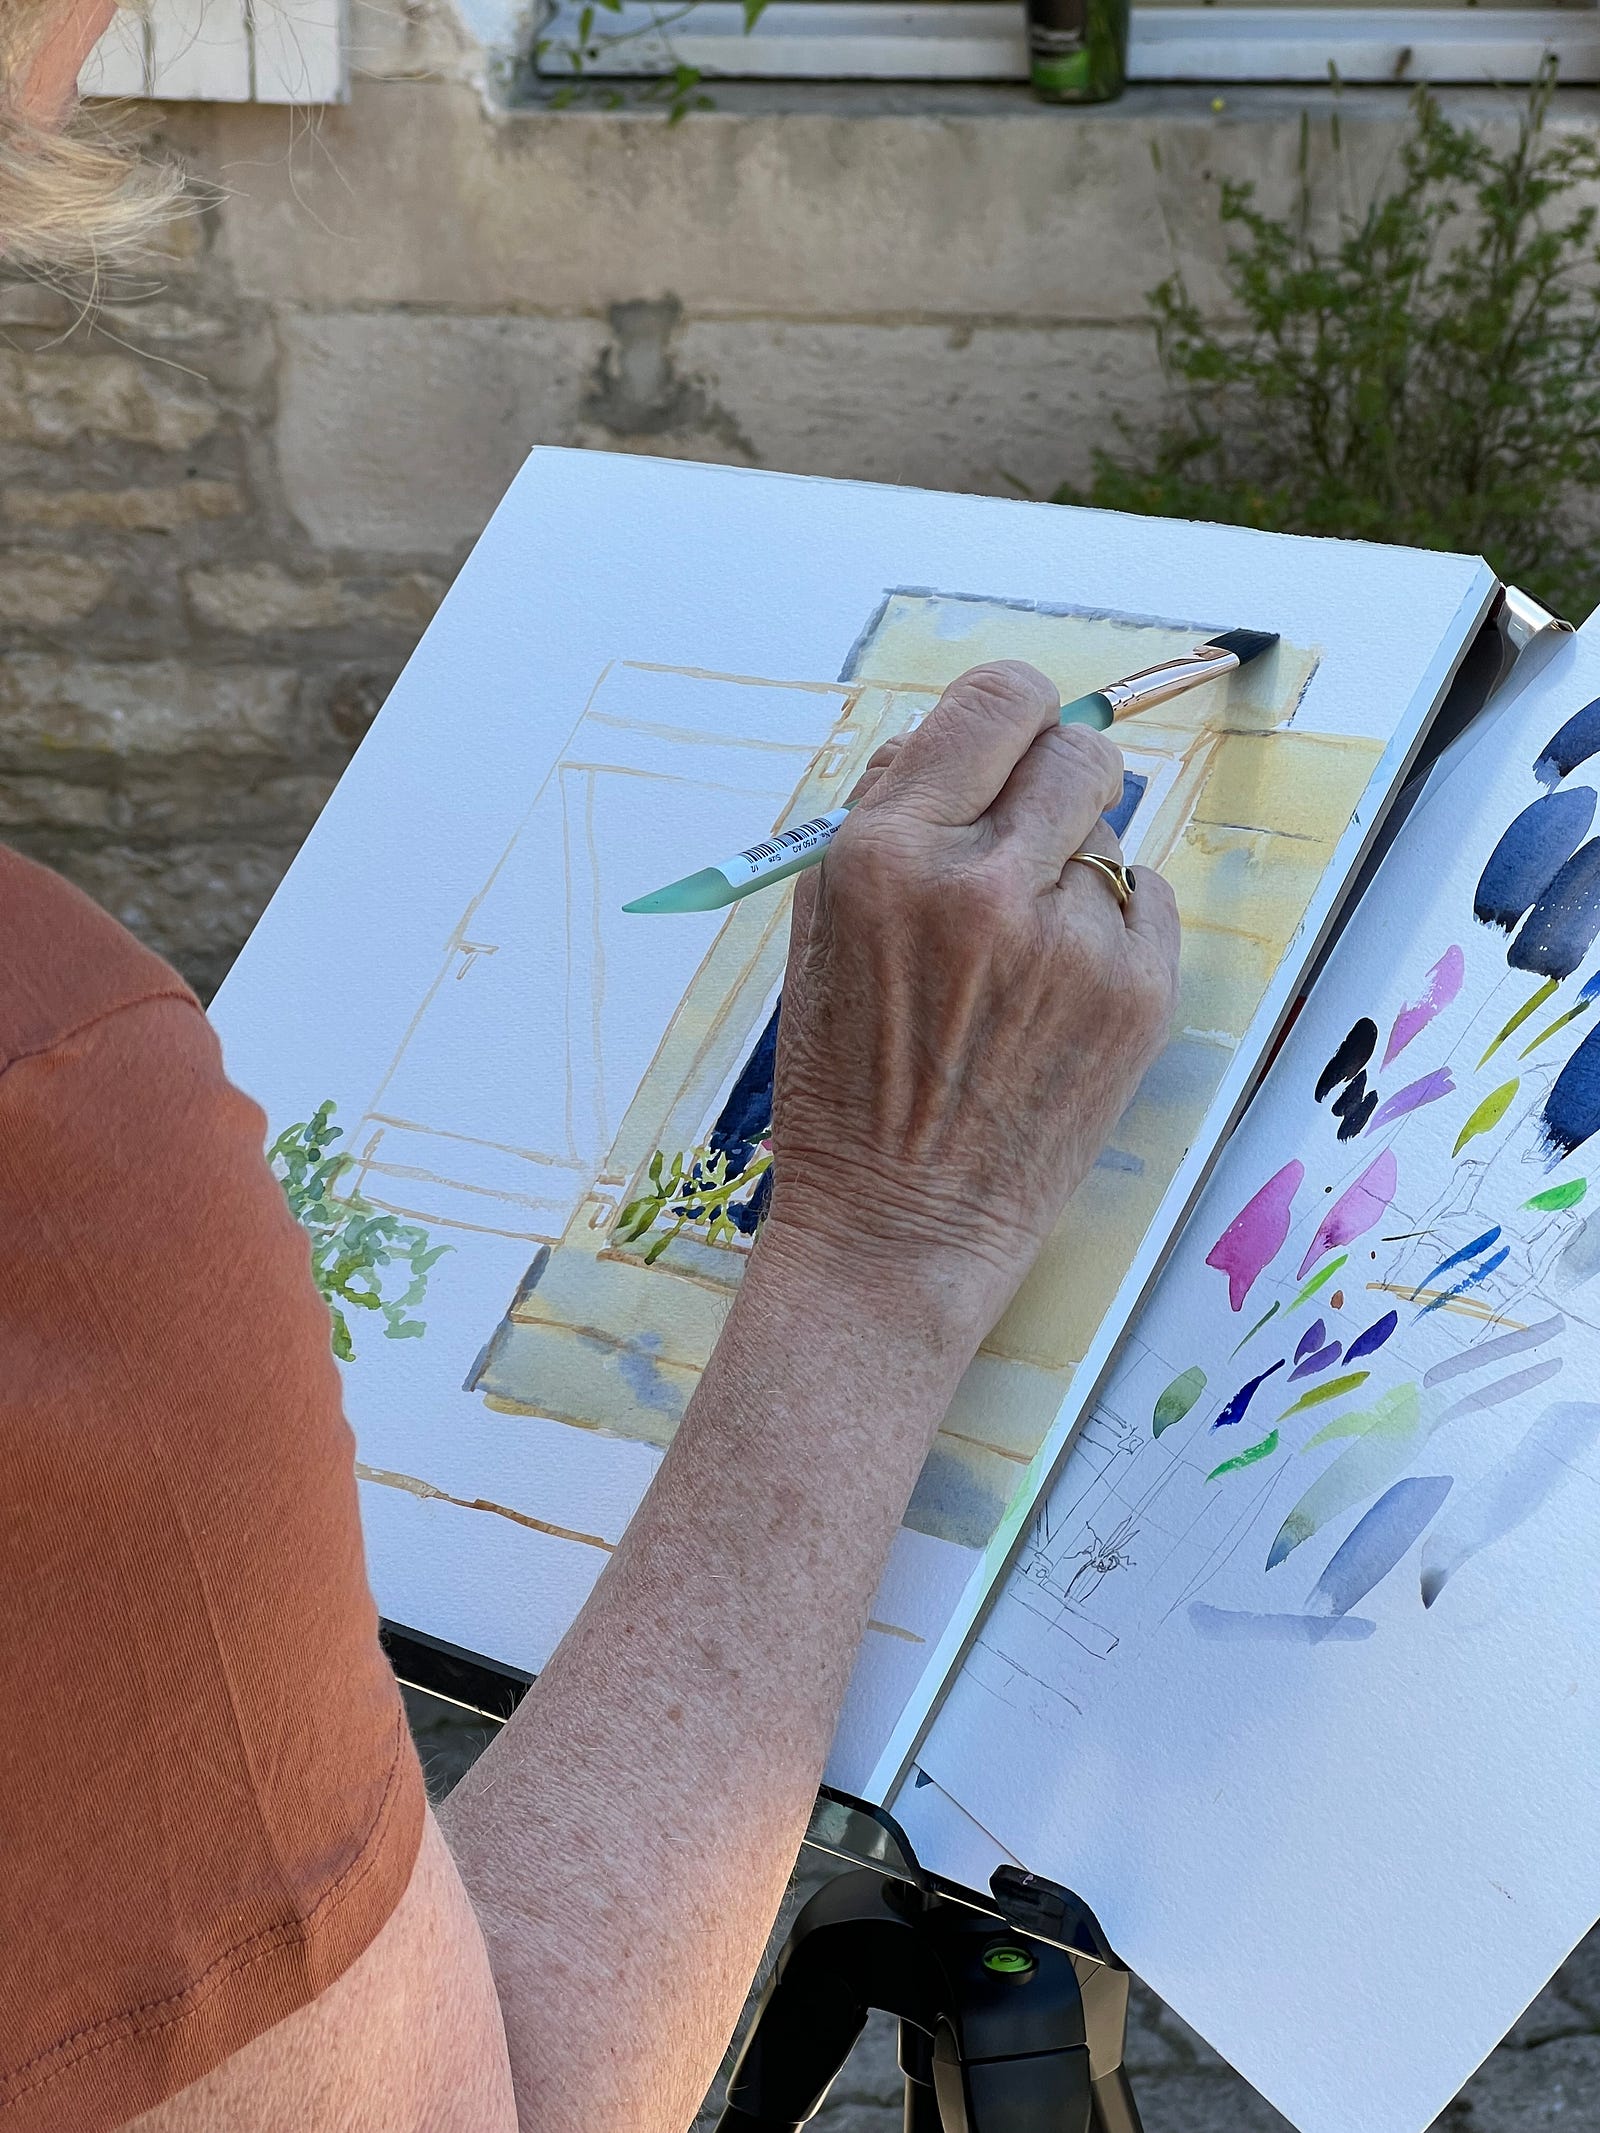 Photo of watercolor artist Roxanne Steed painting a jar of wildflowers at Chateau Orquevaux, France.